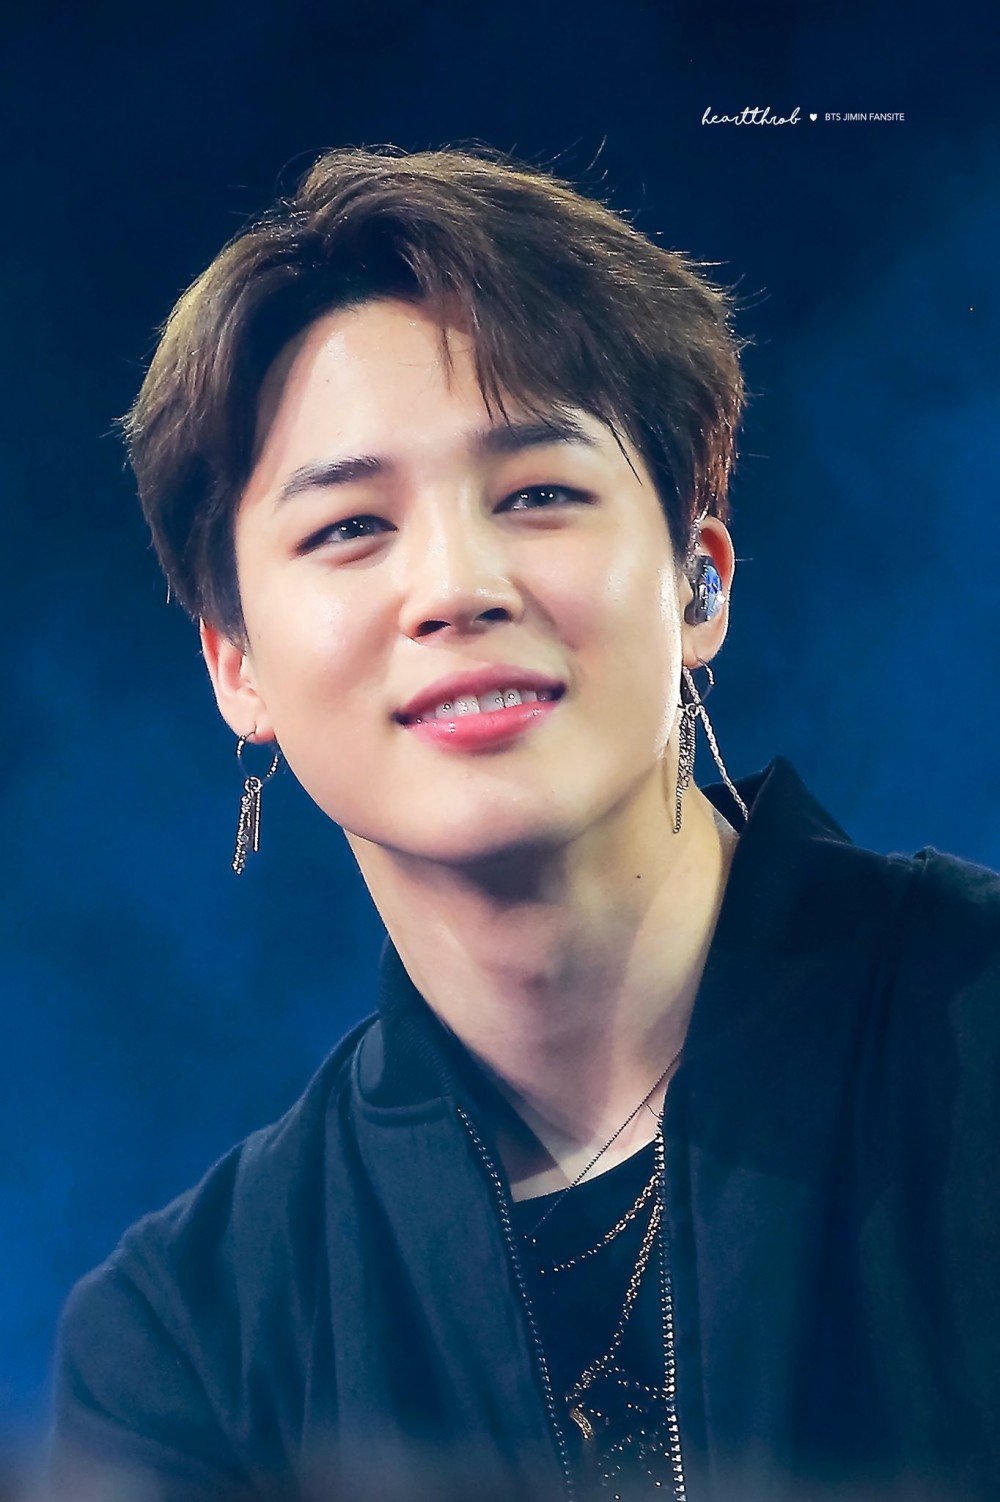 BTS Jimin, the Prince of Busan uplift the pride and image of his ...